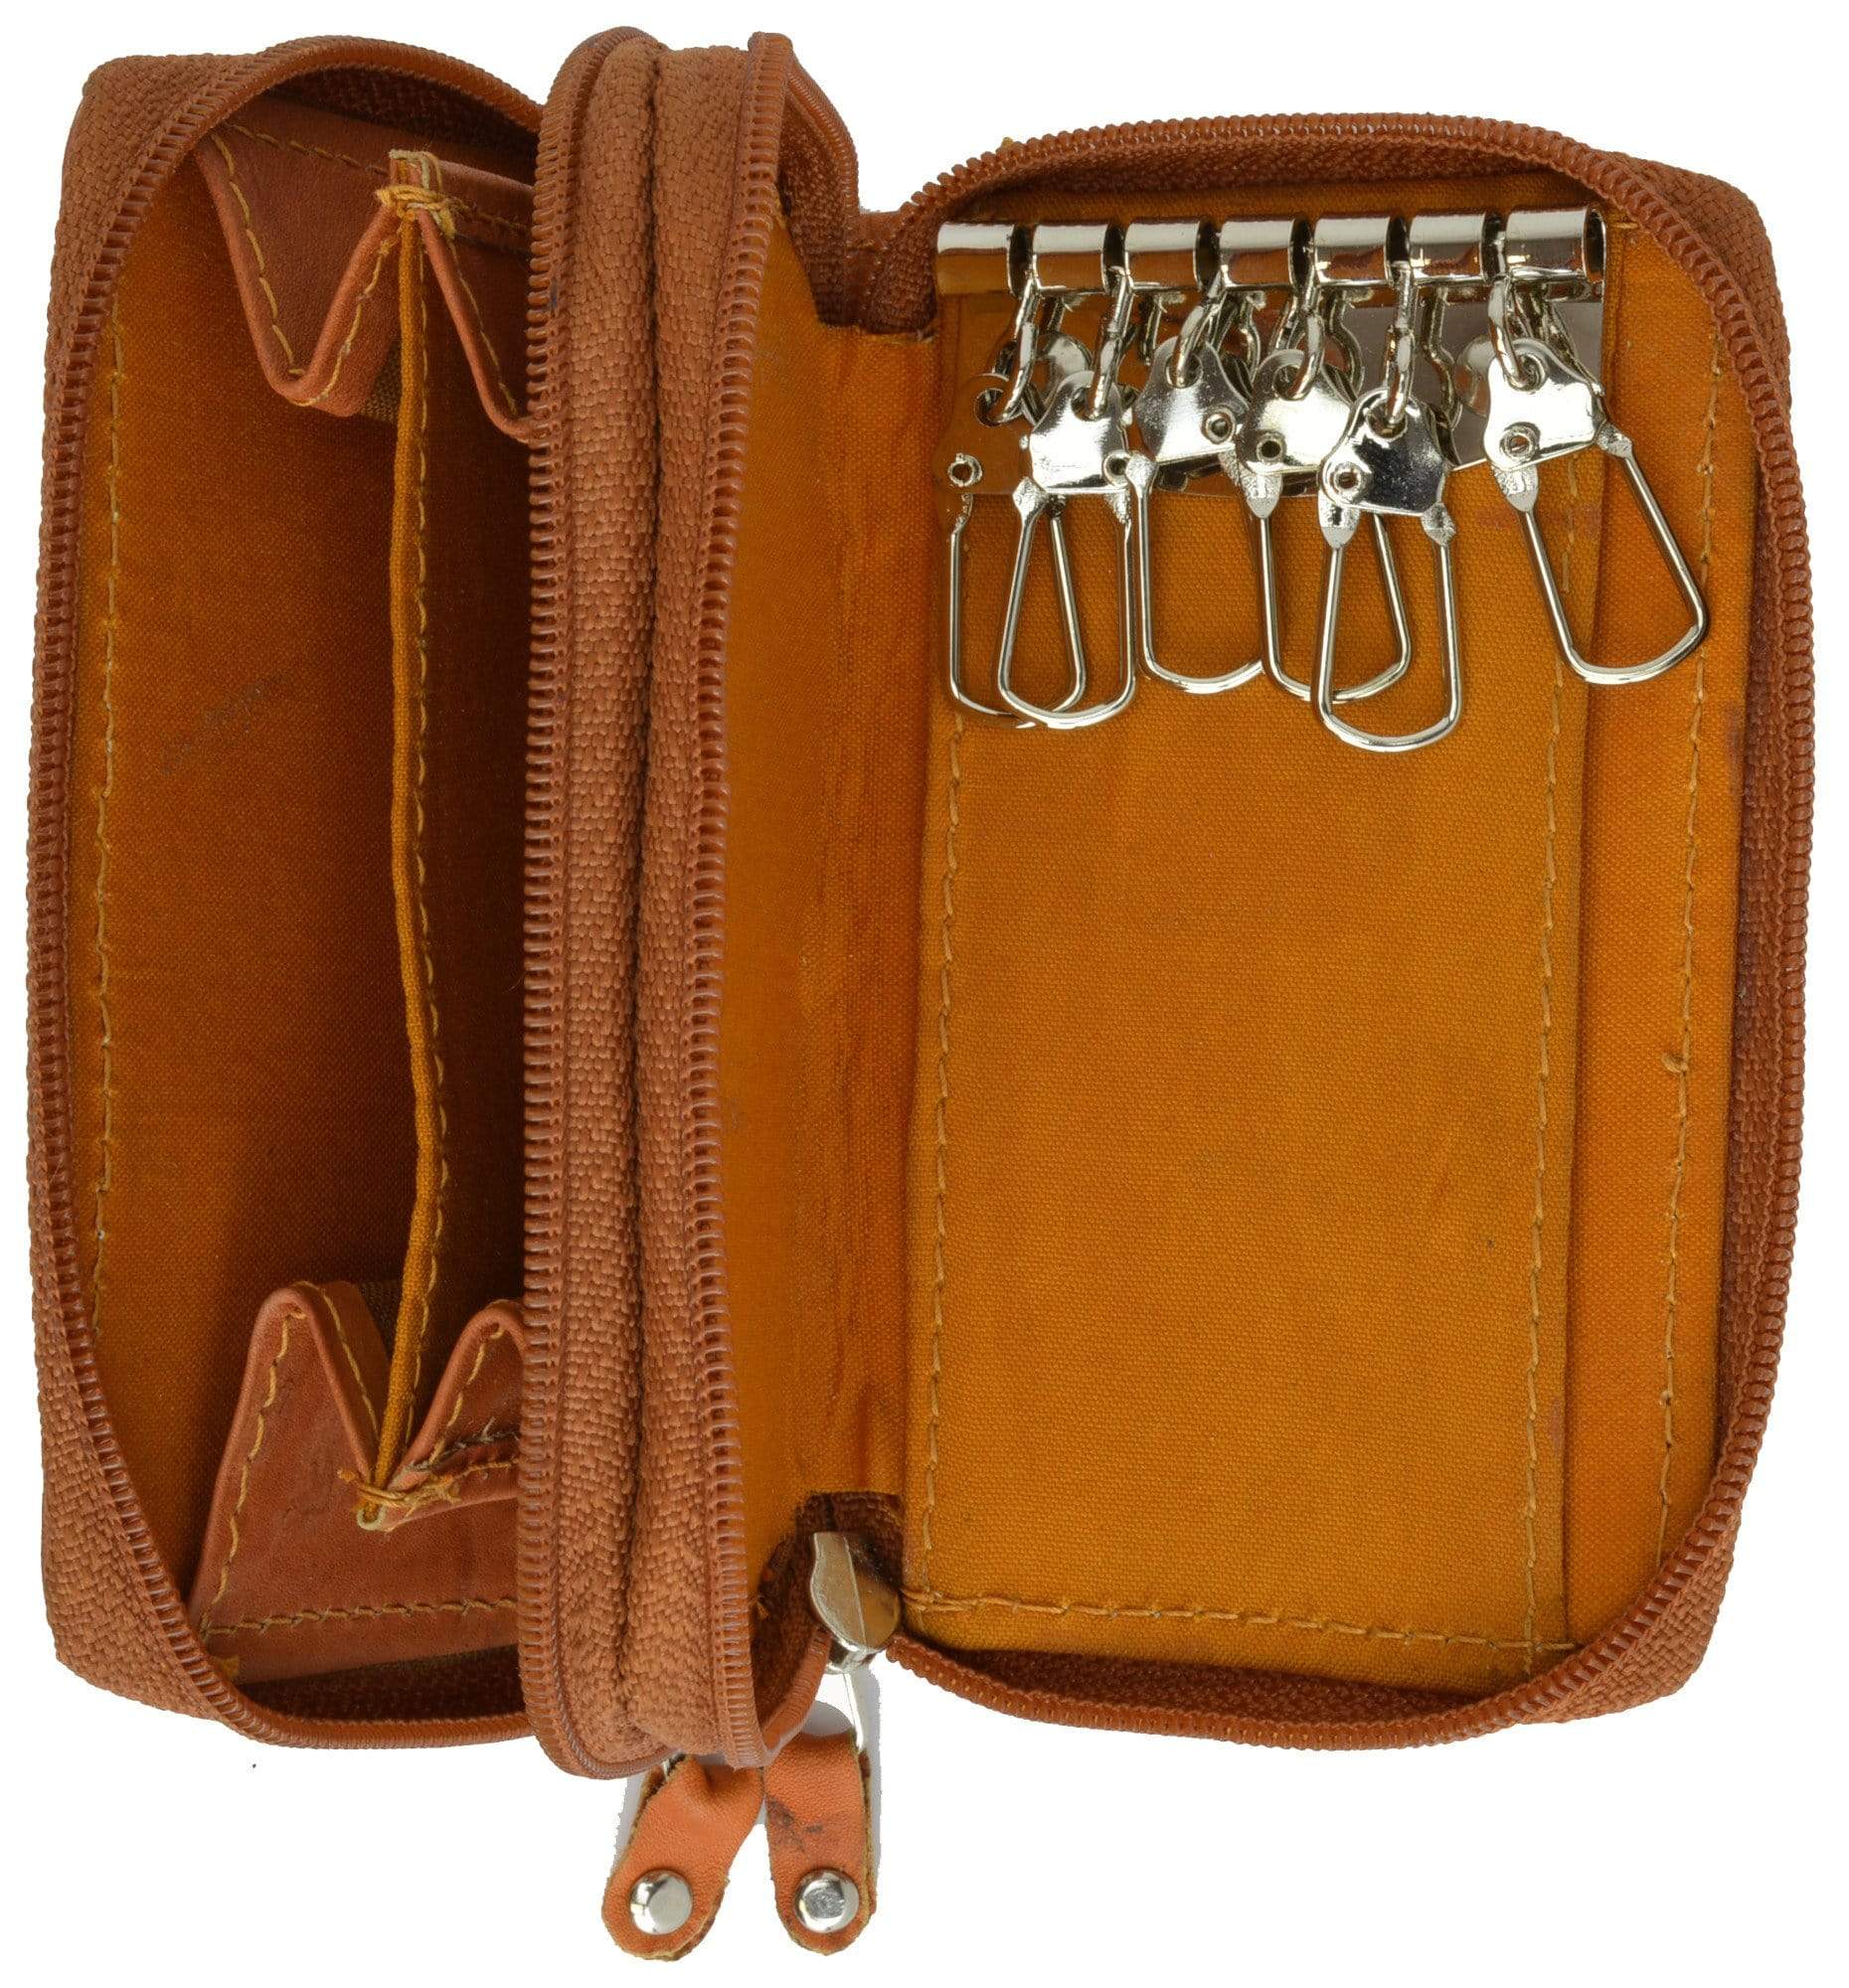 Cow Leather Zippered Key Chain Holder by Marshal Wallet Tan